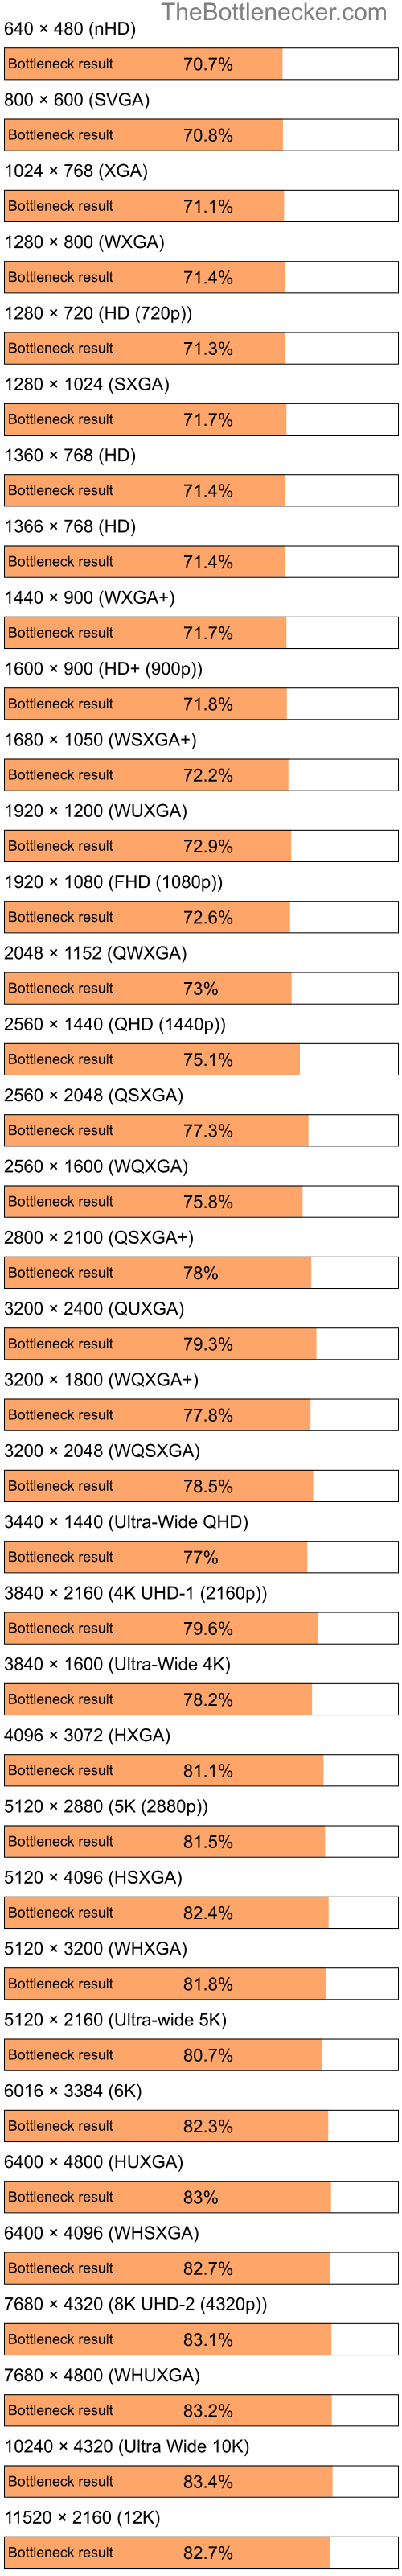 Bottleneck results by resolution for Intel Pentium 4 and NVIDIA GeForce 6200 in Processor Intense Tasks